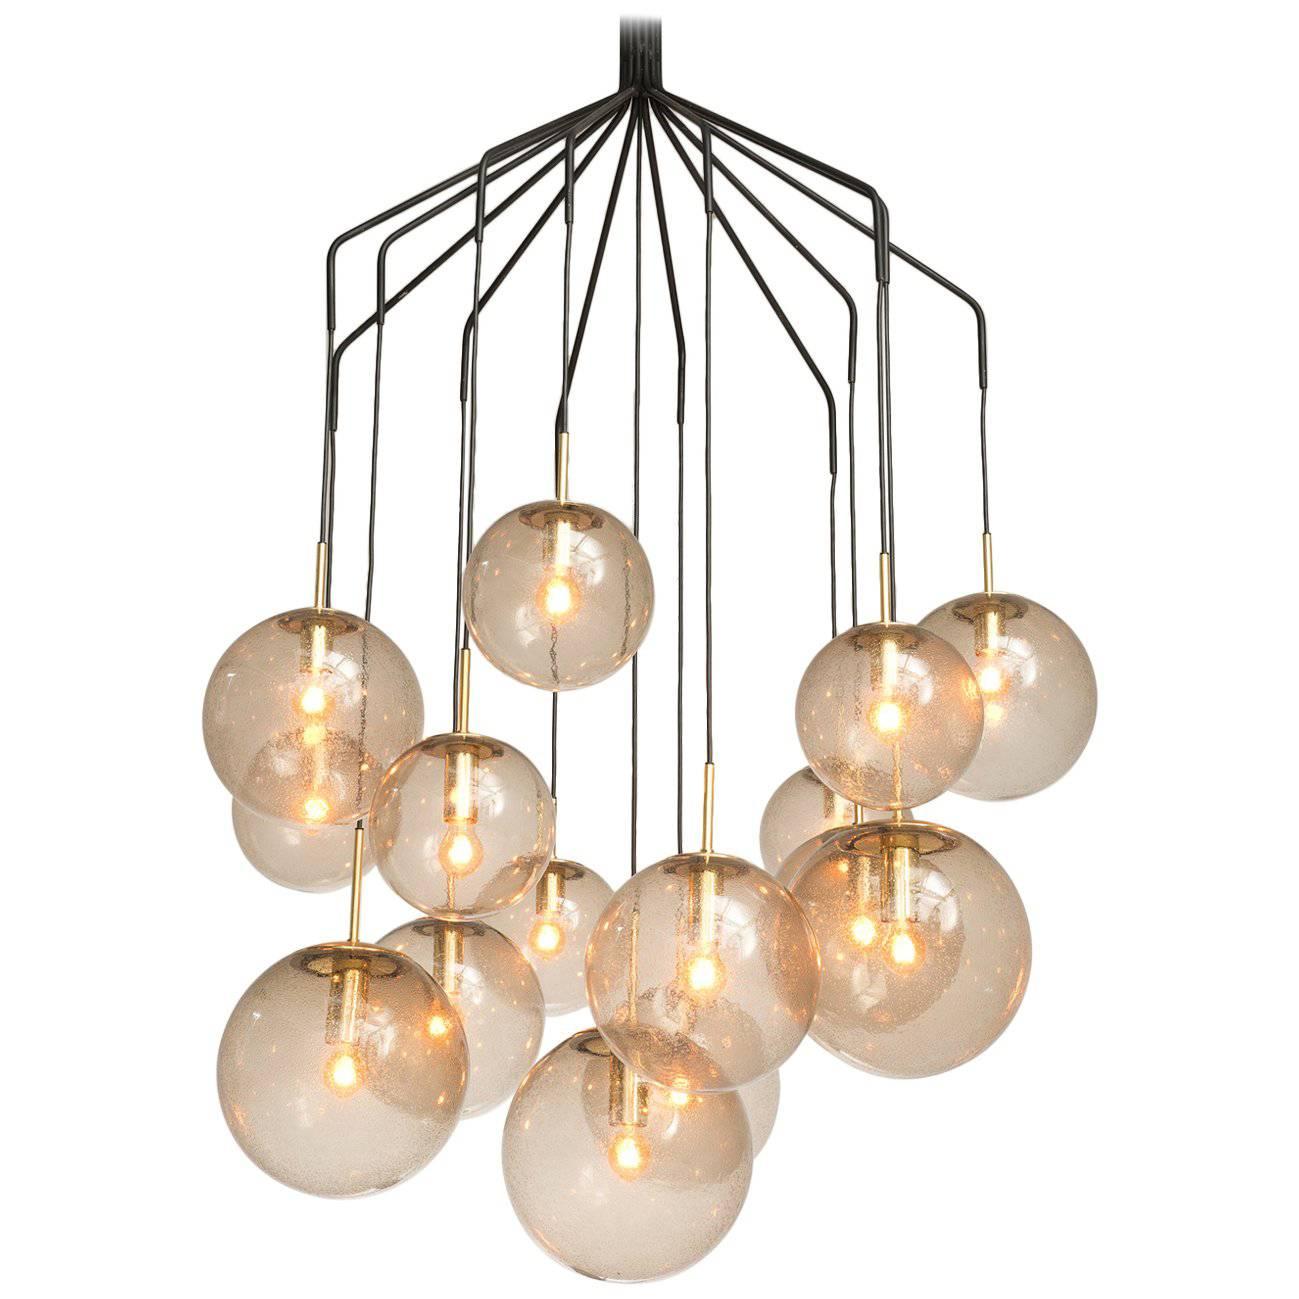 Large 'Spider' Chandelier with 15 Spheres in Smoked Glass and Brass